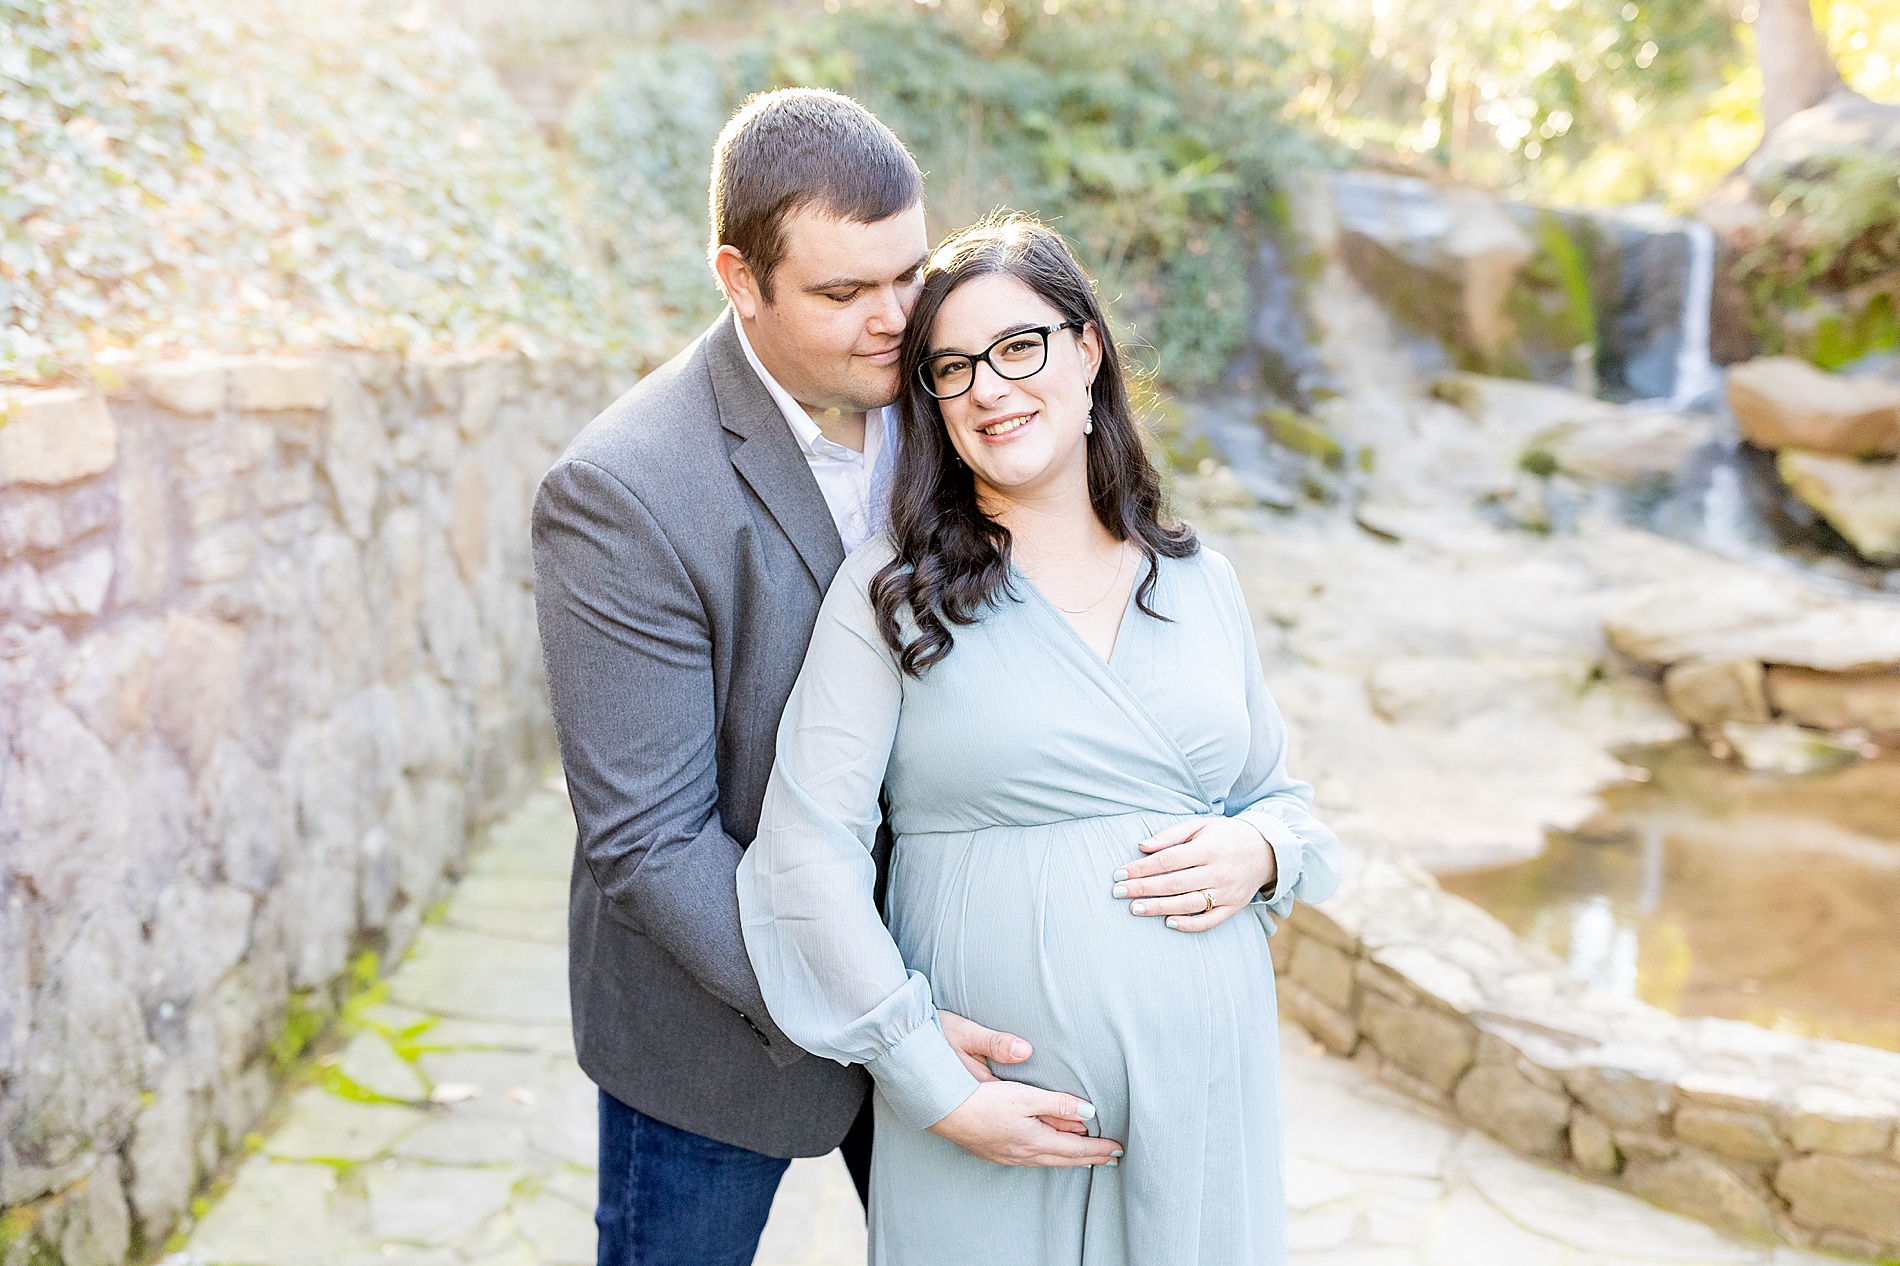 portrait photographry locations in Greenville, SC